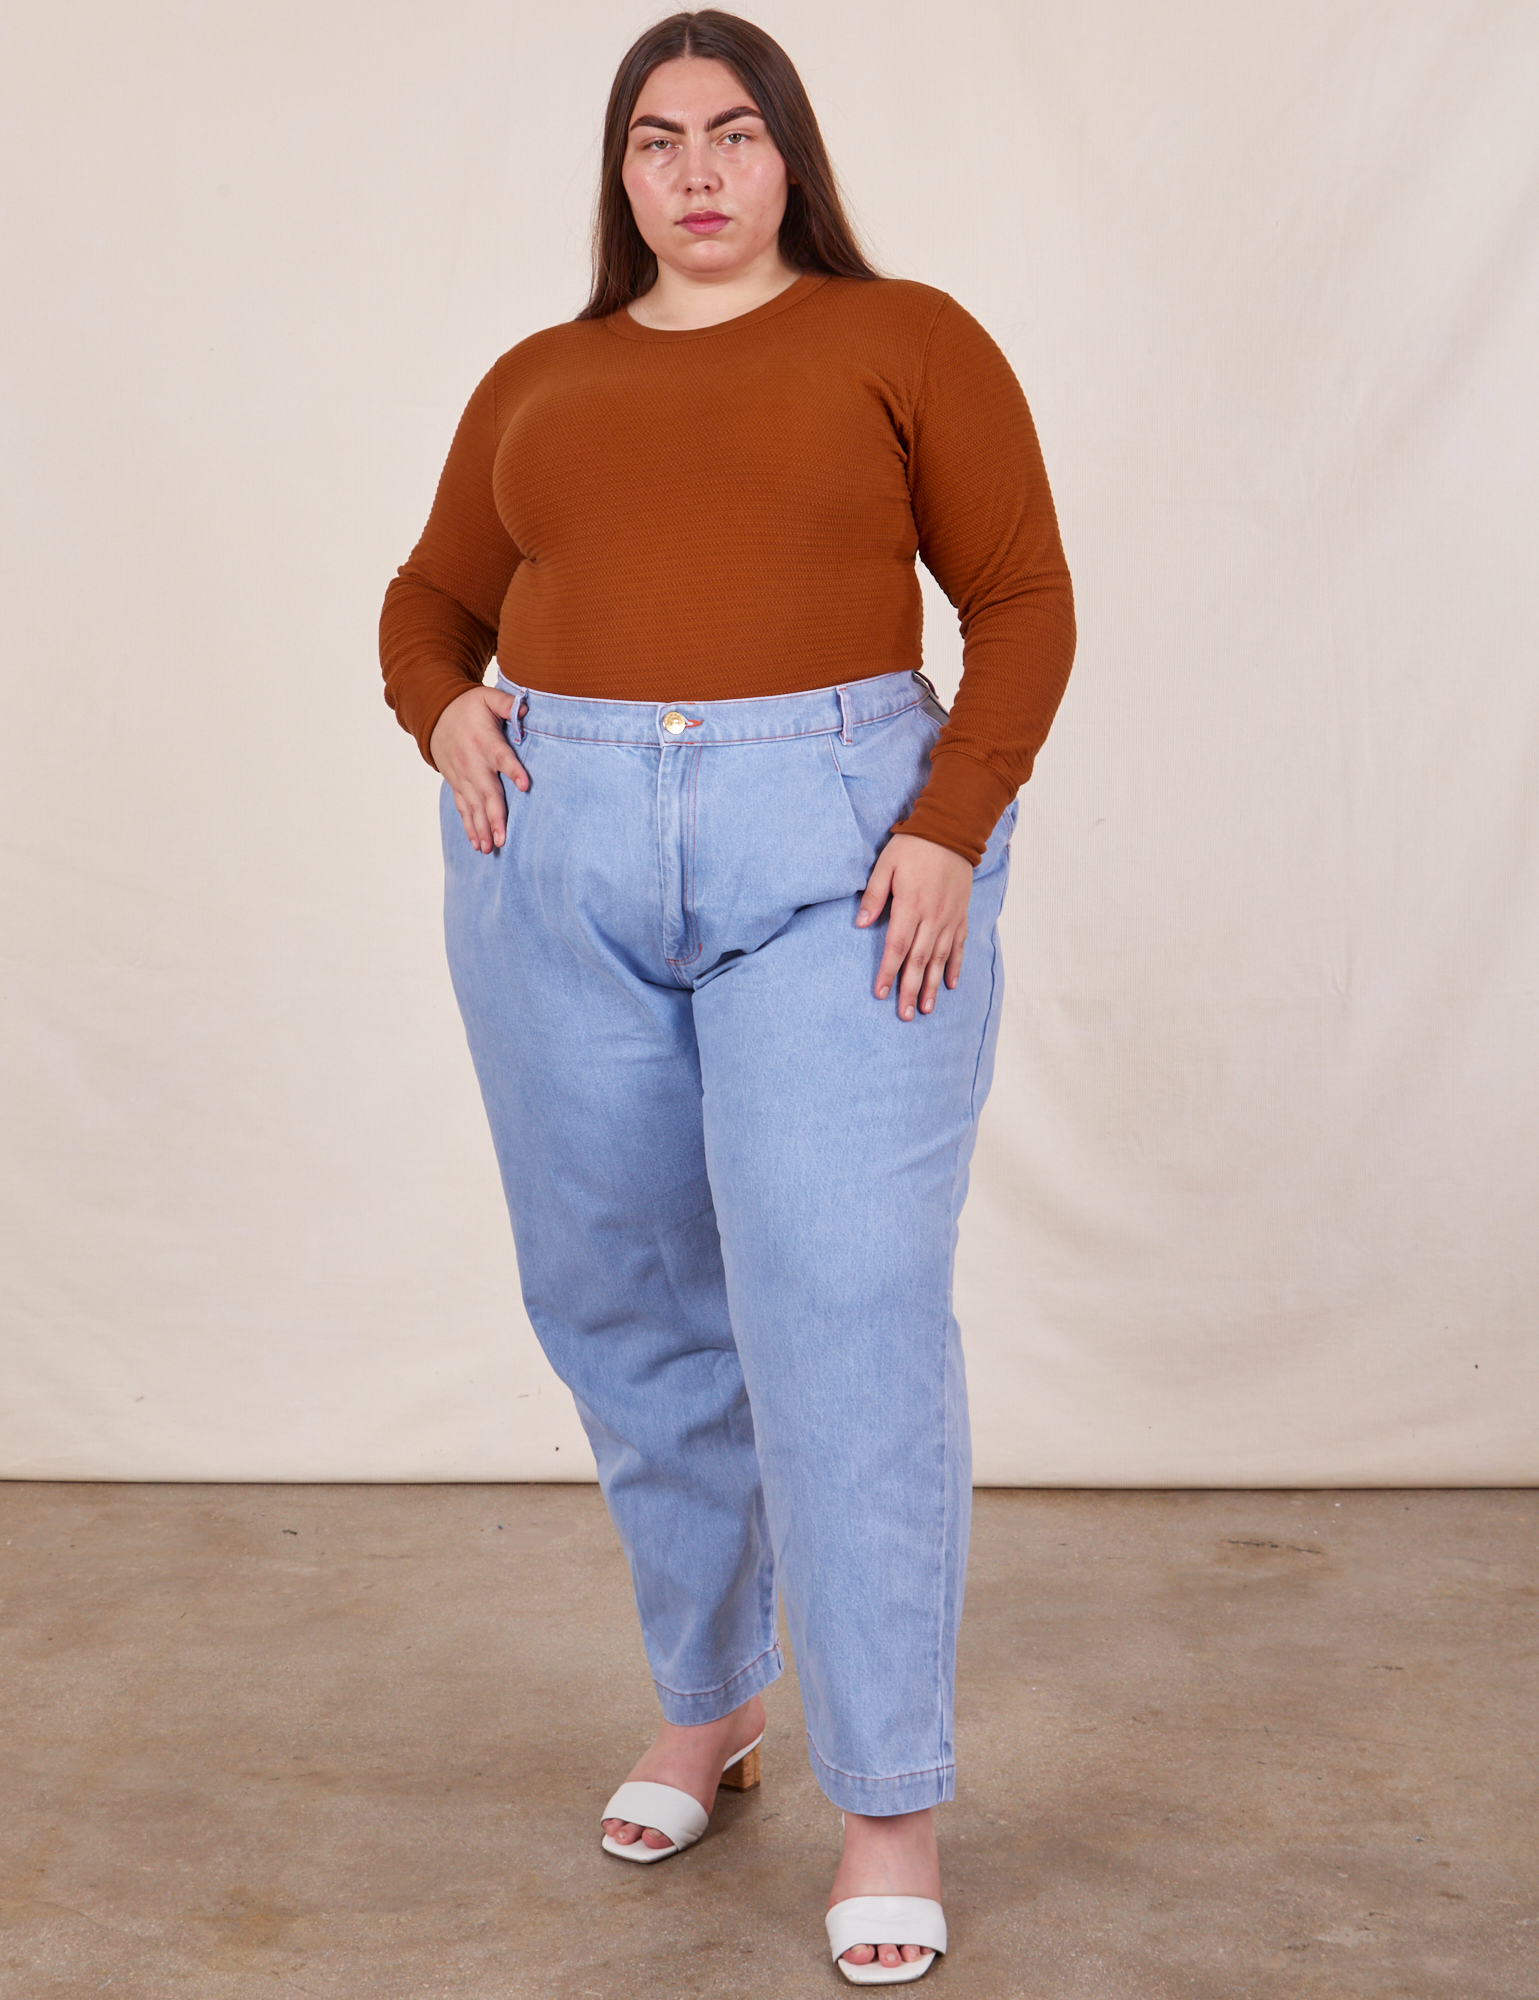 Marielena is wearing Honeycomb Thermal in Burnt Terracotta tucked into light wash Denim Trousers